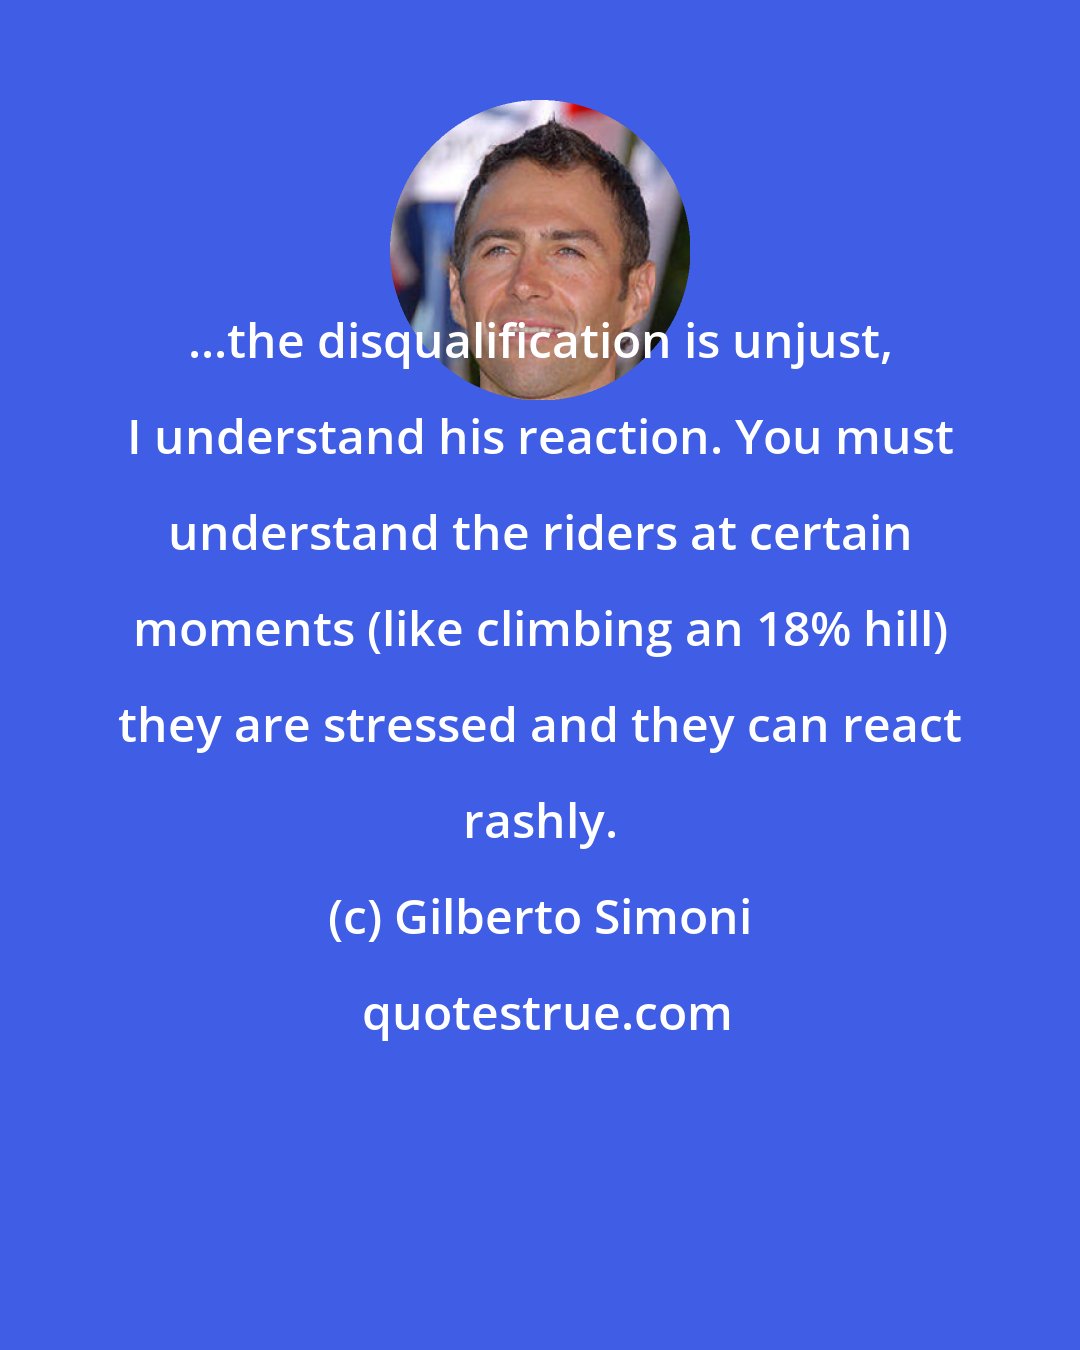 Gilberto Simoni: ...the disqualification is unjust, I understand his reaction. You must understand the riders at certain moments (like climbing an 18% hill) they are stressed and they can react rashly.